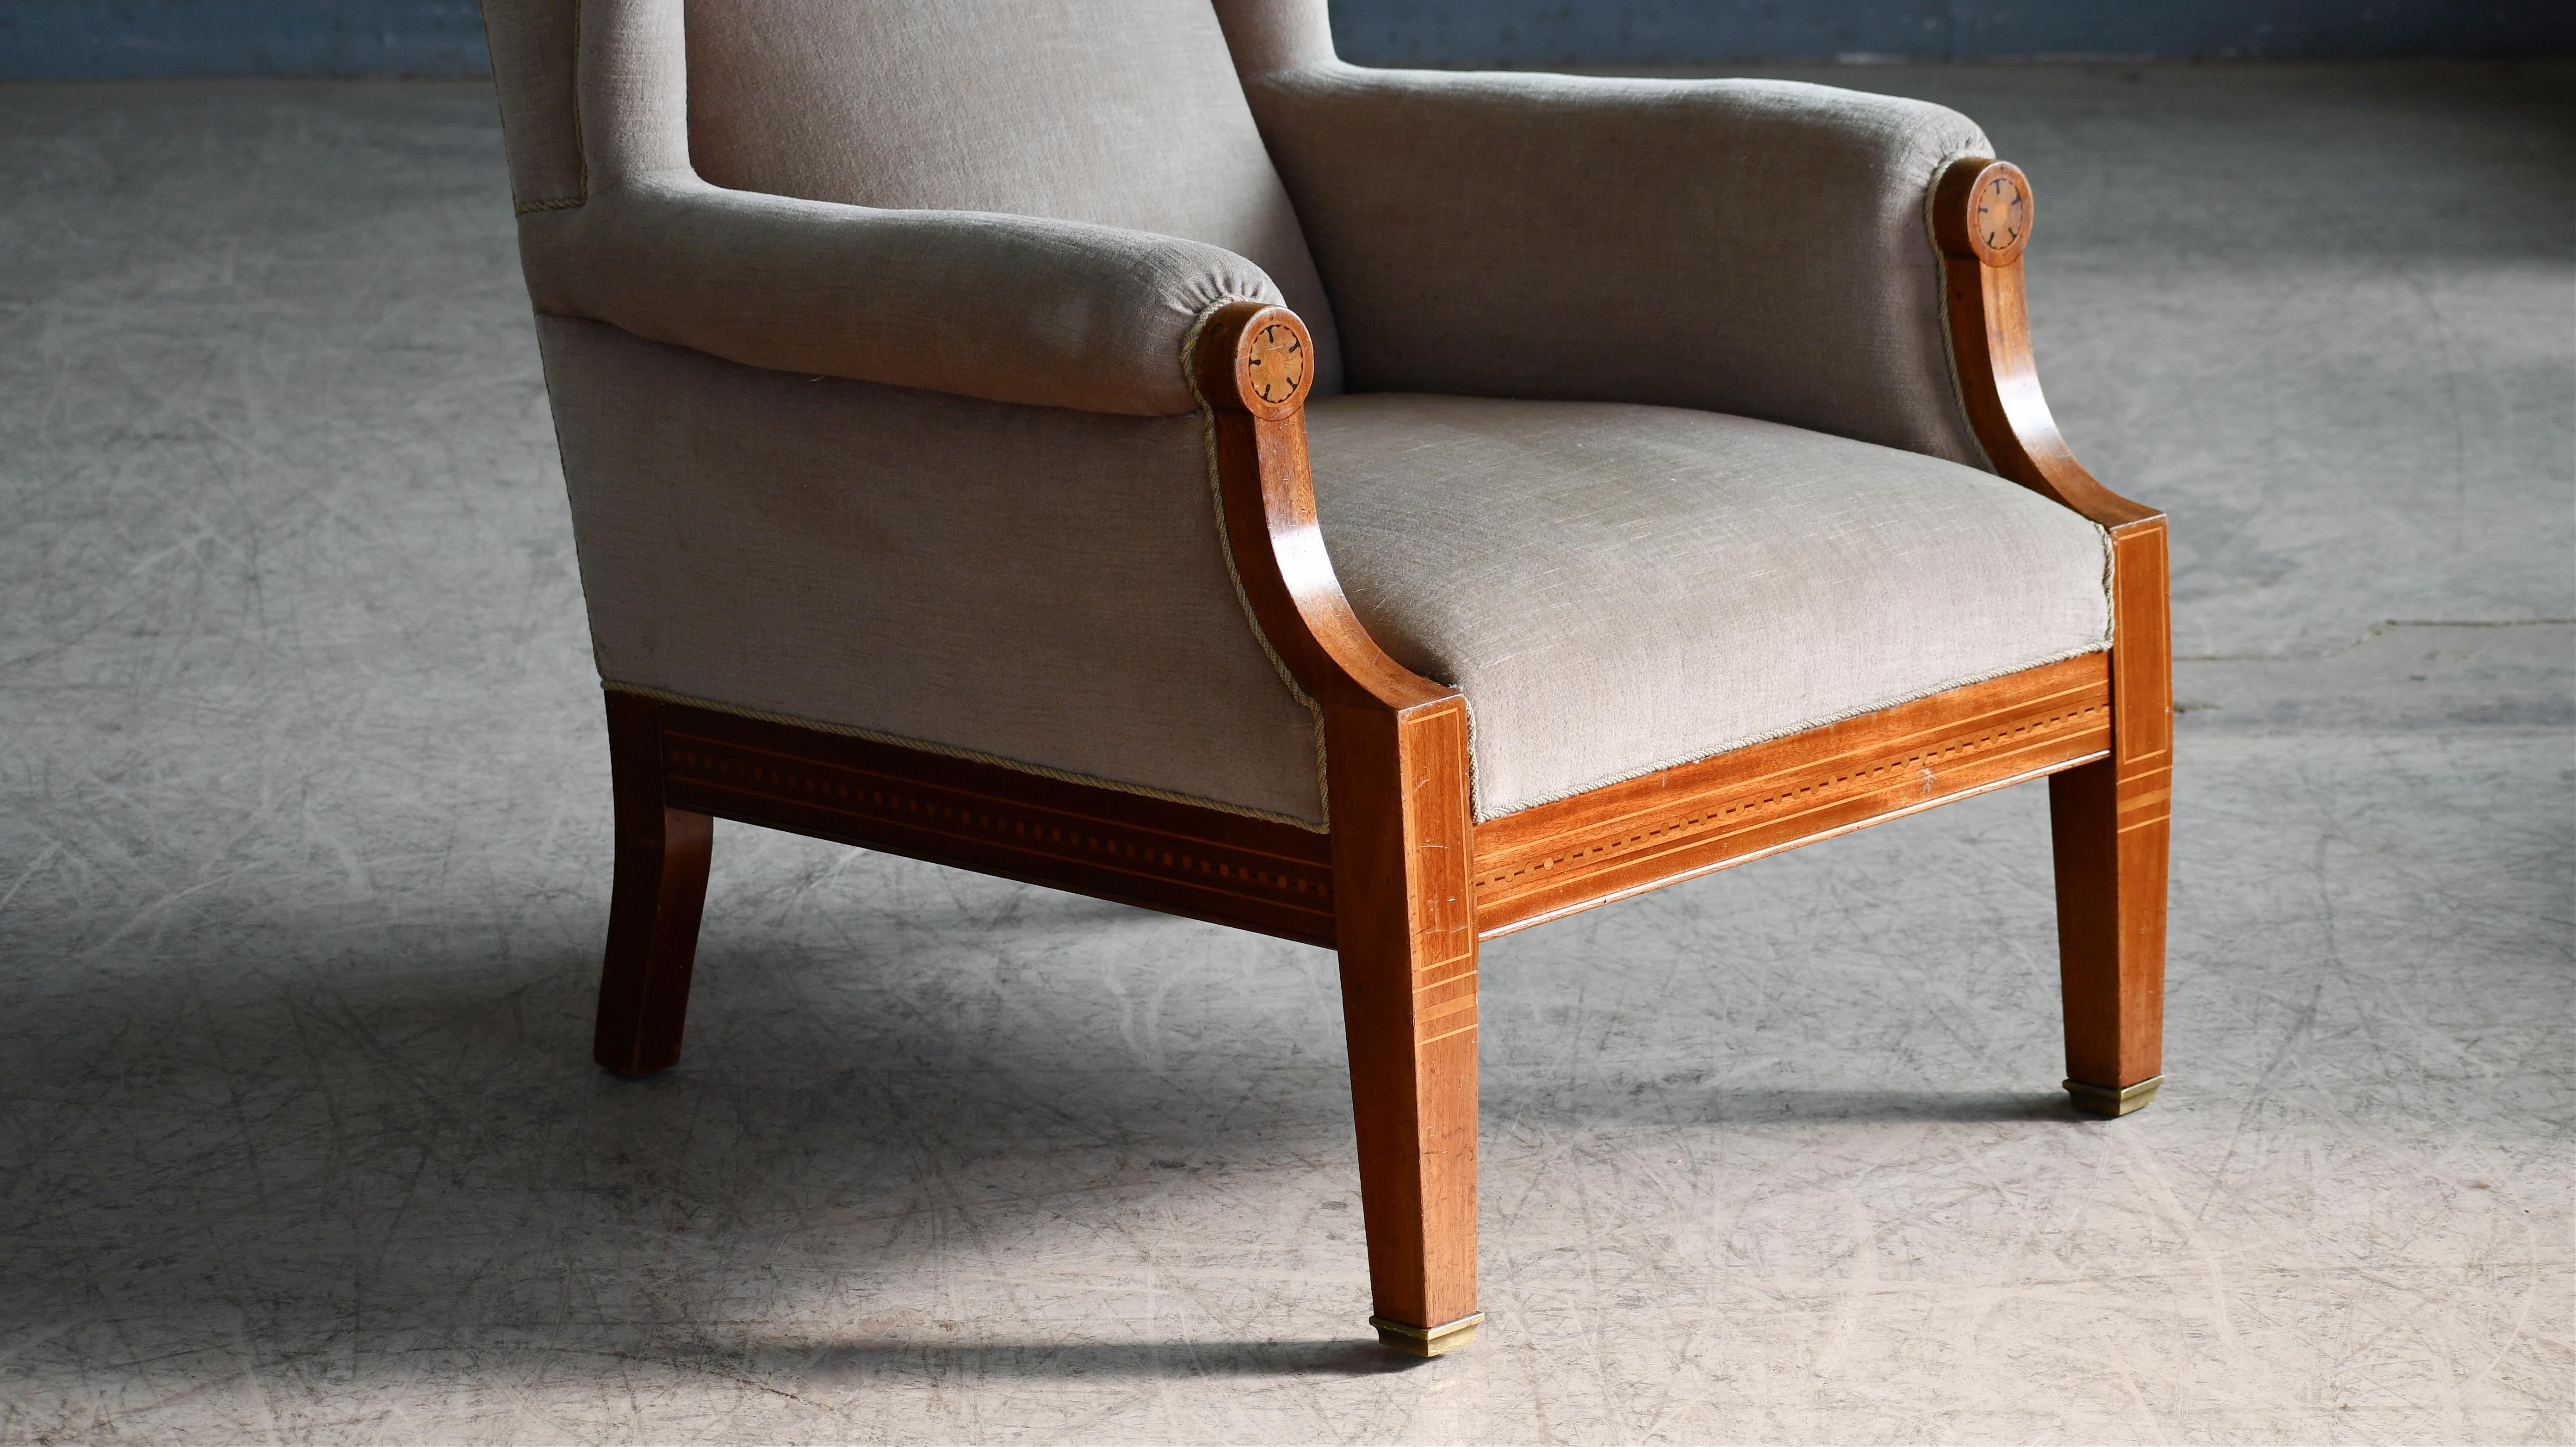 Mid-20th Century Danish Wingback Chair in Mohair and Mahogany with Marquetry ca. 1930's